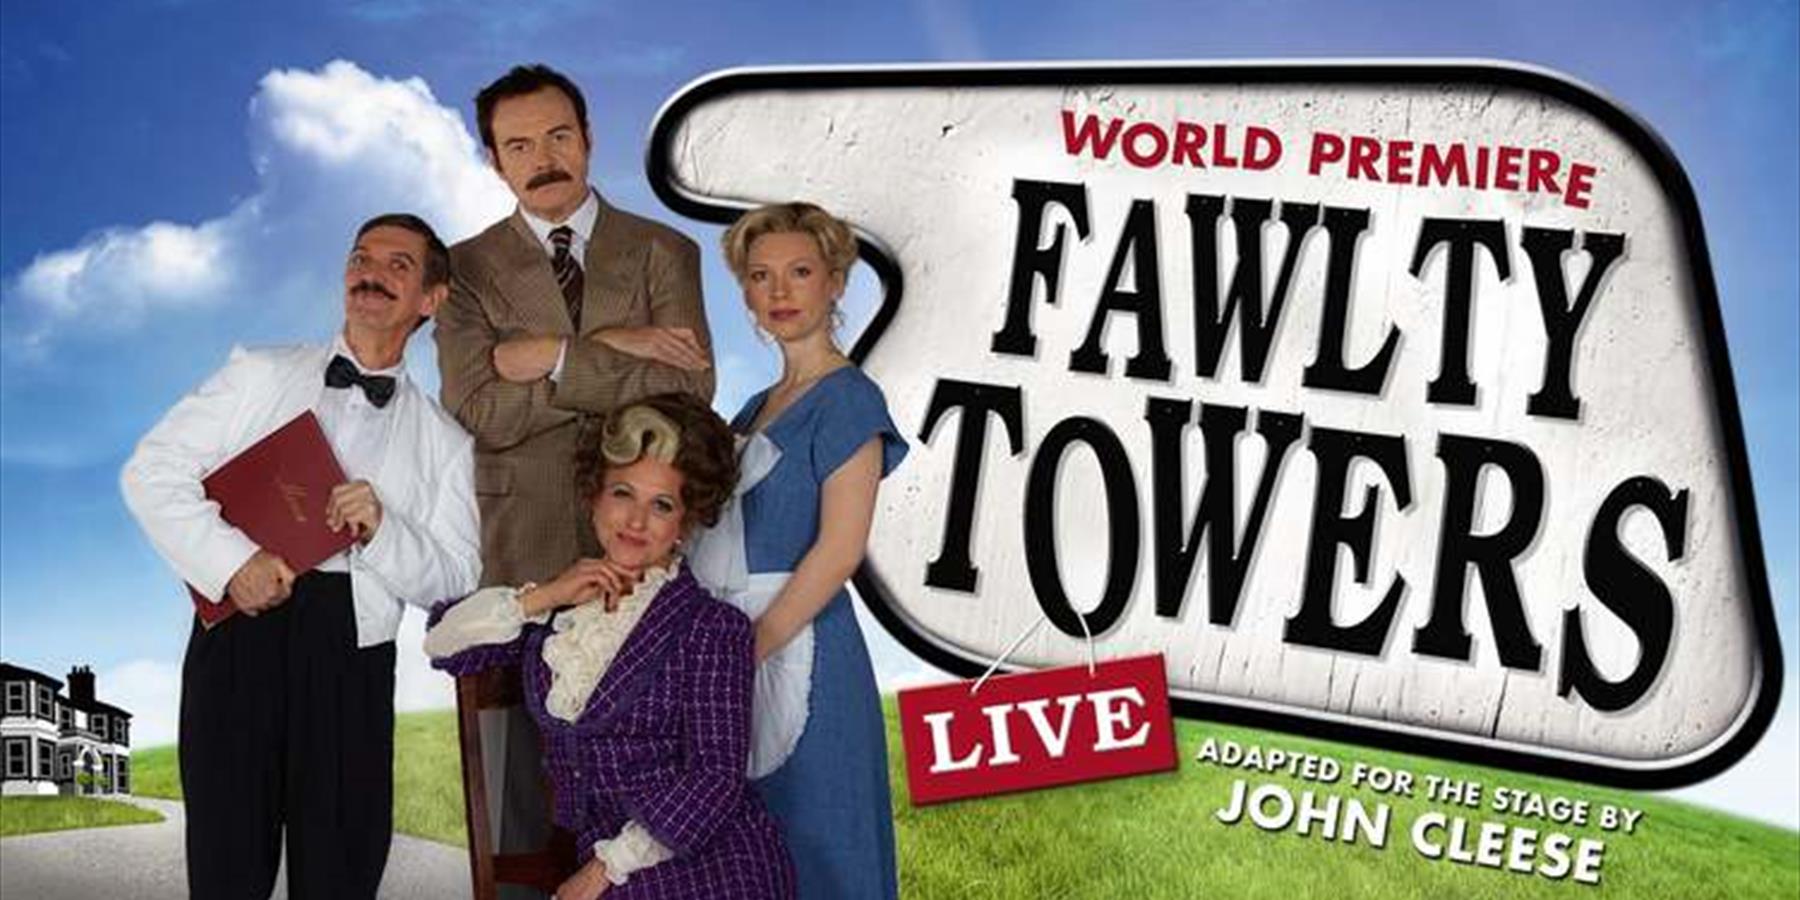 Fawlty Towers Dinner Show